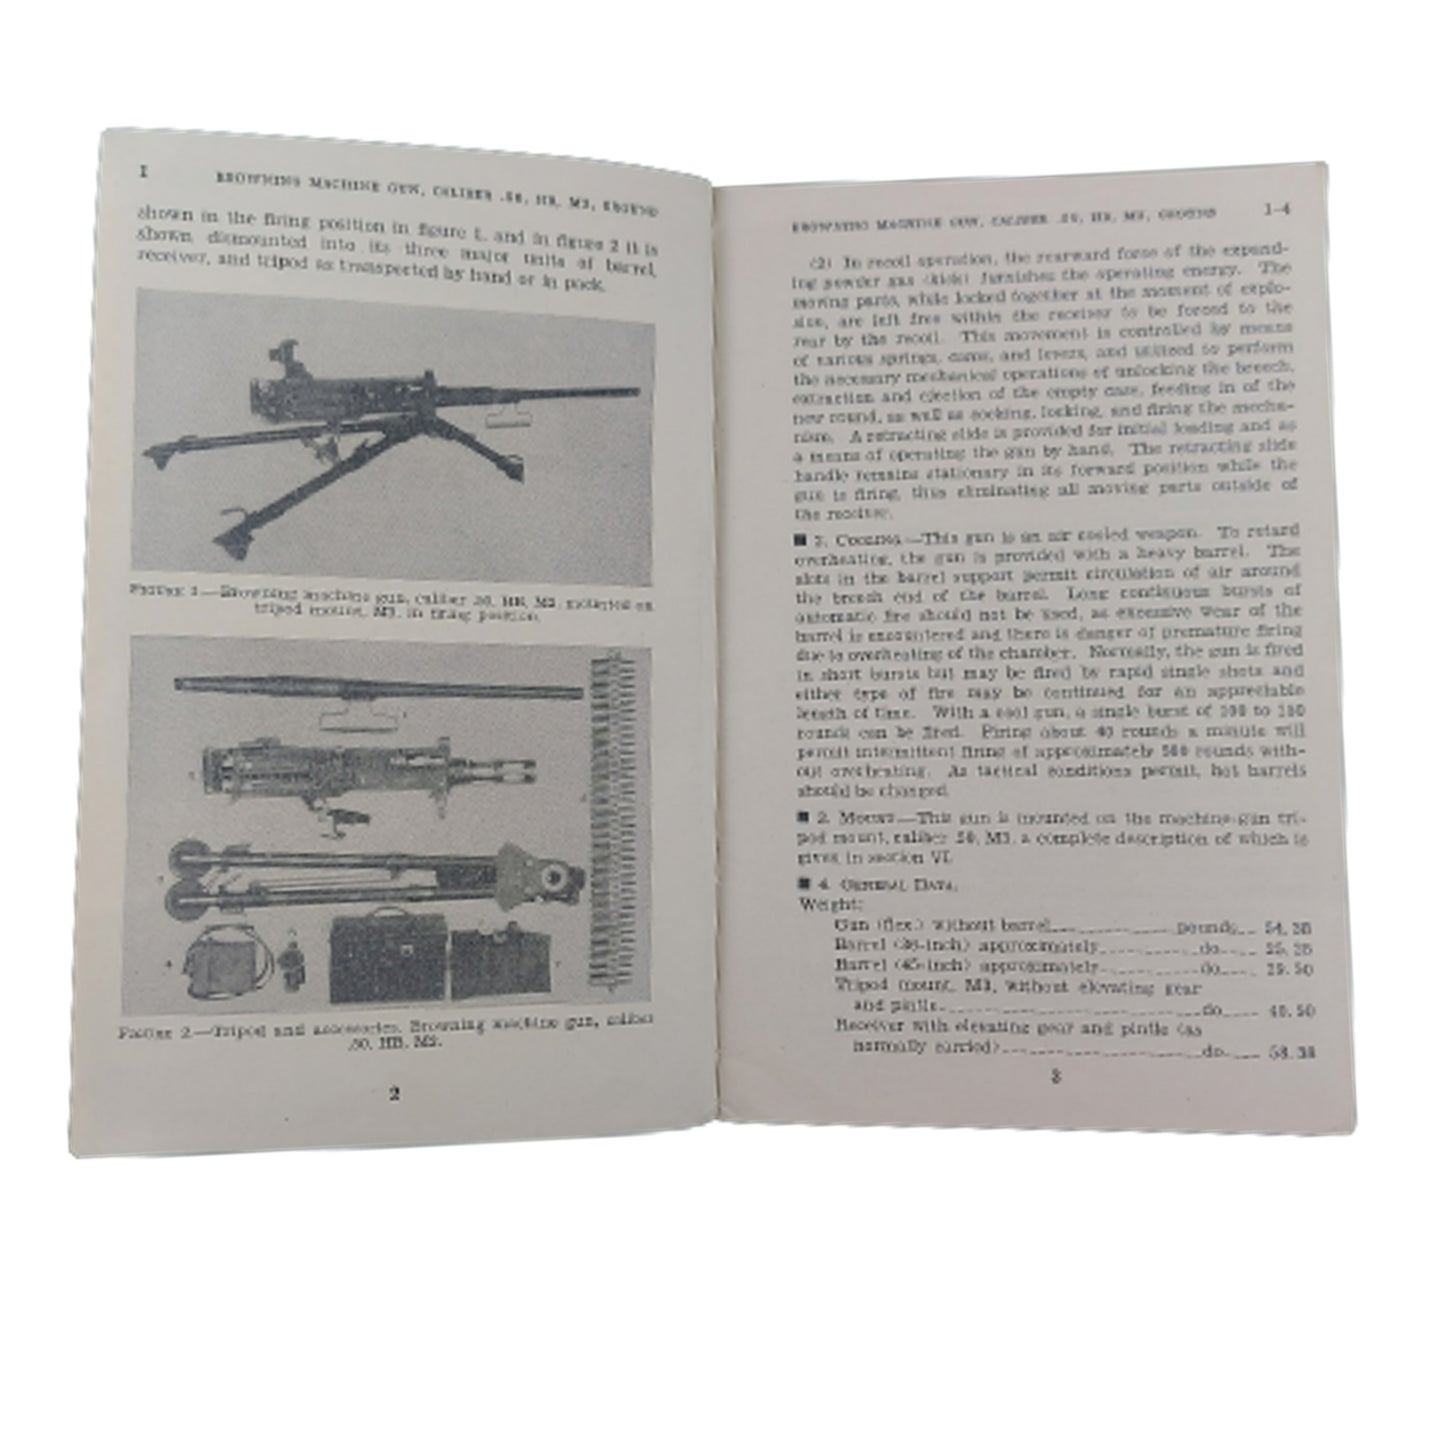 Named WW2 Manual - Browning M2 50 Ground MG- RCOC Royal Canadian Ordnance Corps